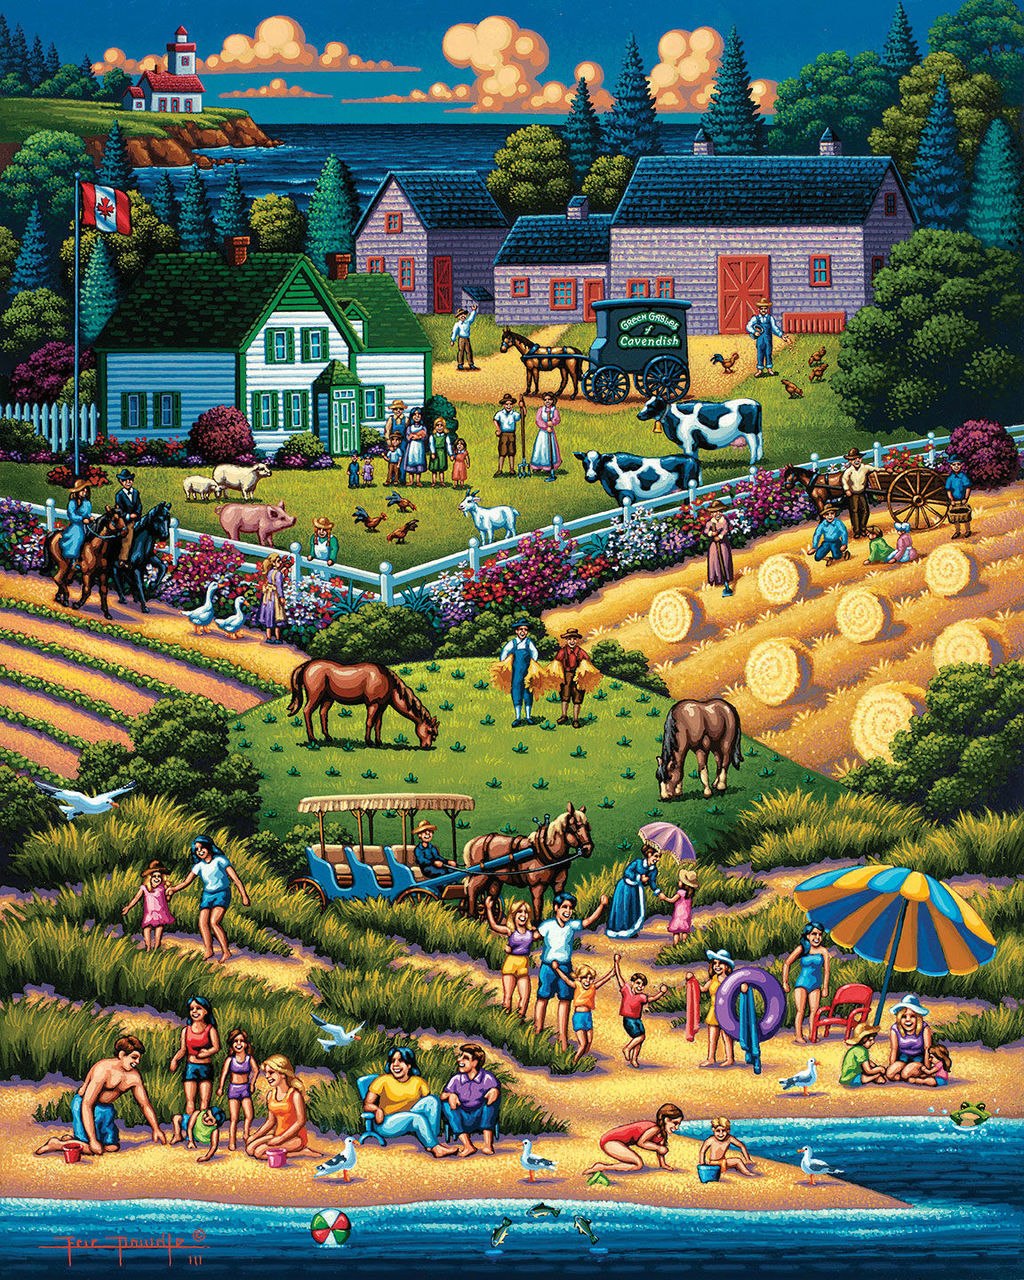 P.E.I. Green Gables - 1000pc Jigsaw Puzzle by Dowdle